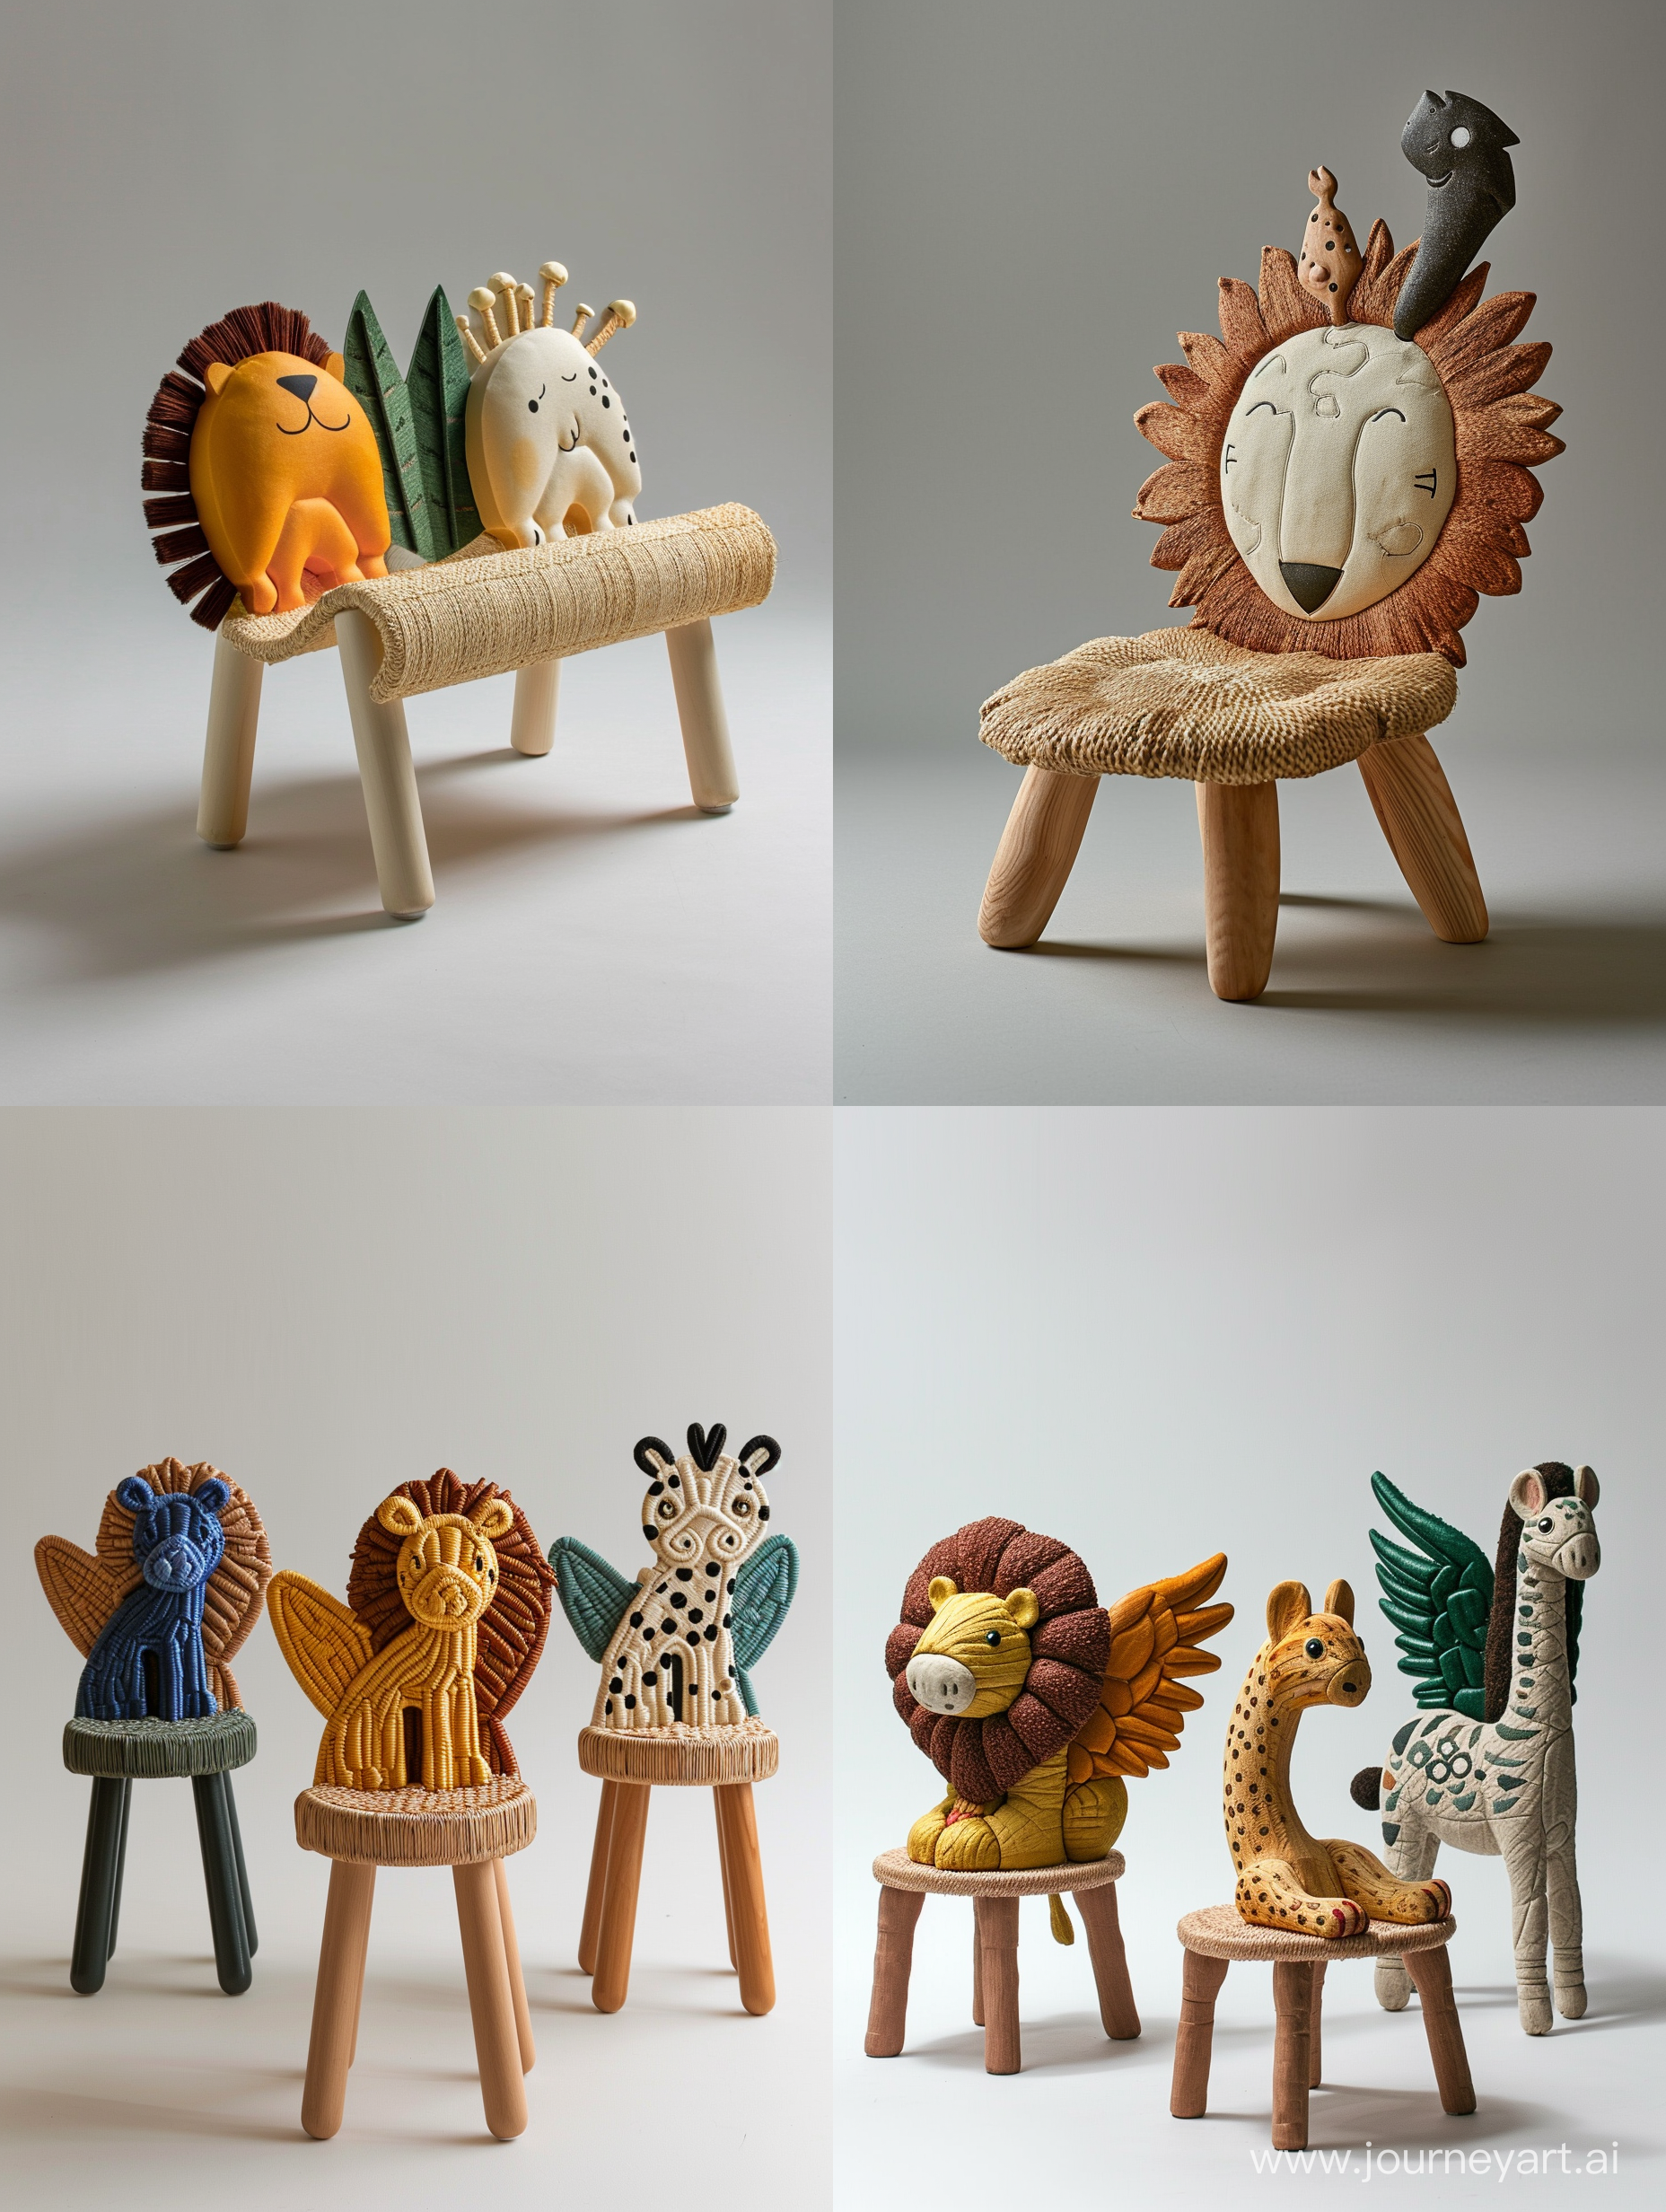 imagine an image of a minimal and perfect structure sturdy children’s chair inspired by Children's drawing of cute safari animals like cute lion or zebra or griffin or cheetah or hippocampus  , with backrests shaped like different creatures. Use recycled wood for the frame and woven plant fibers for seating areas, depicted in colors representative of the chosen animals. The seat should stand approximately 30cm tall, built to educate about wildlife and ensure durability.unreal ,realistic style